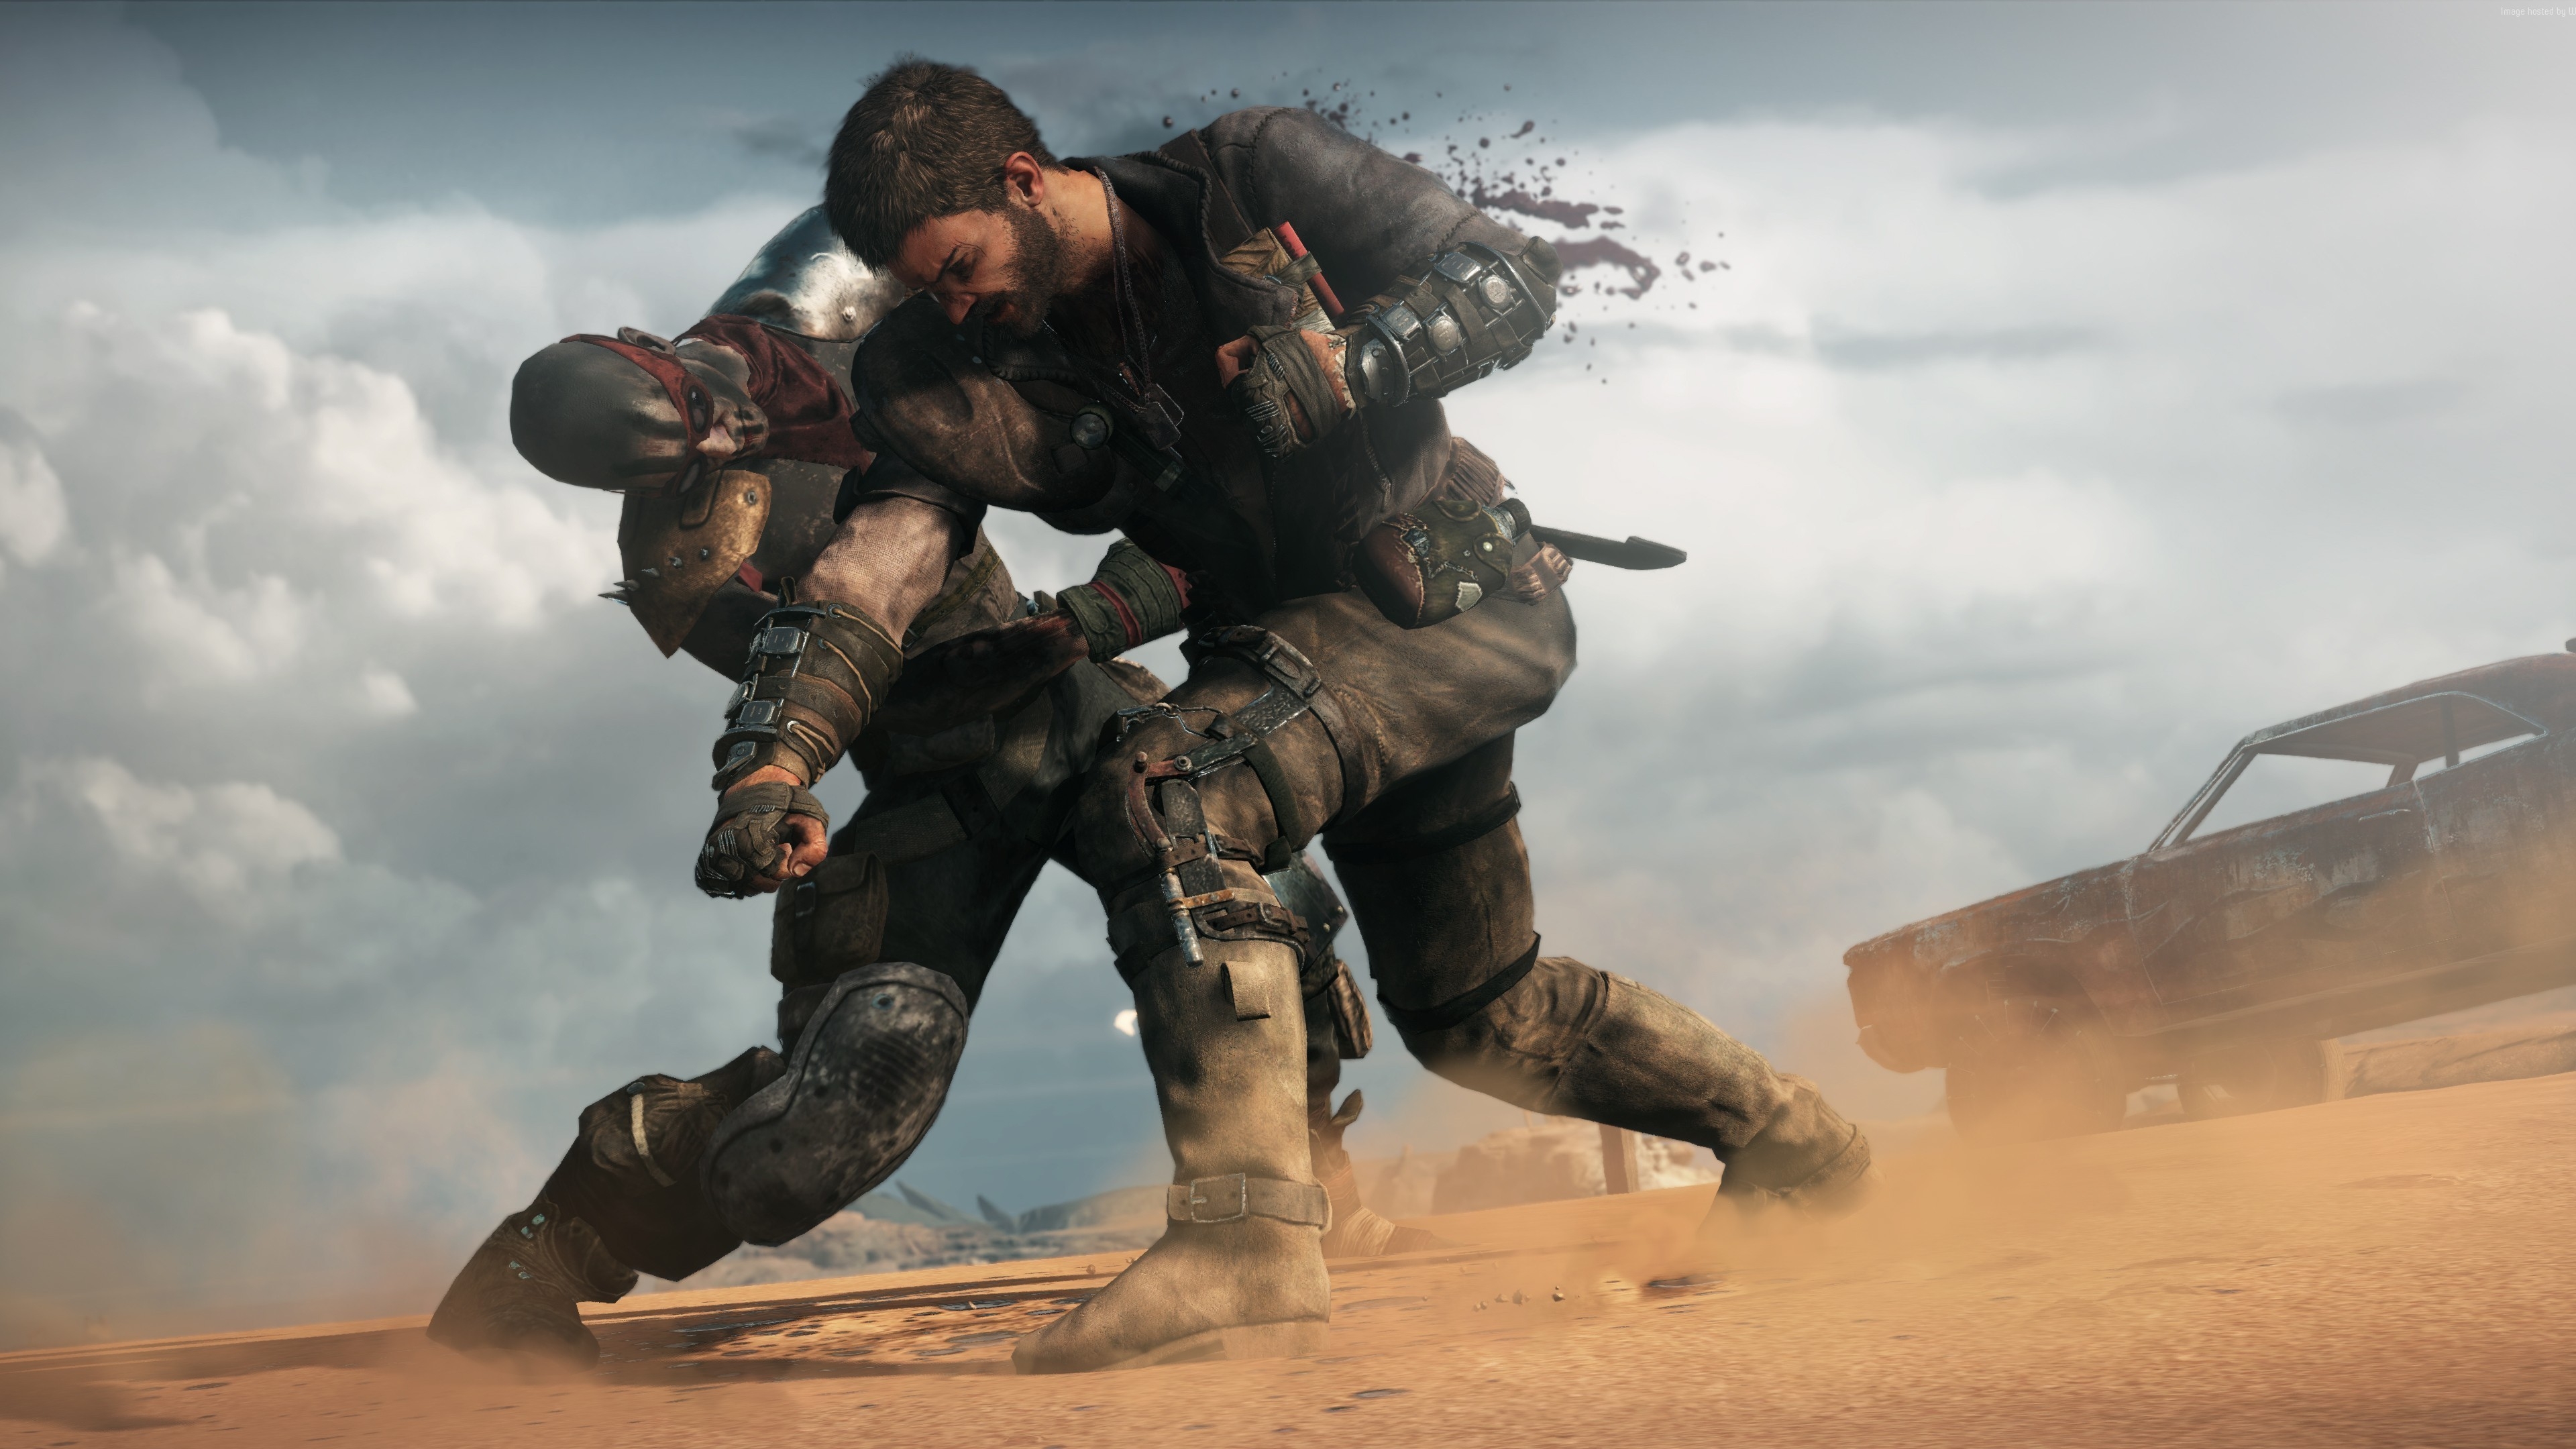 Mad Max The Game for 3840 x 2160 Ultra HD resolution